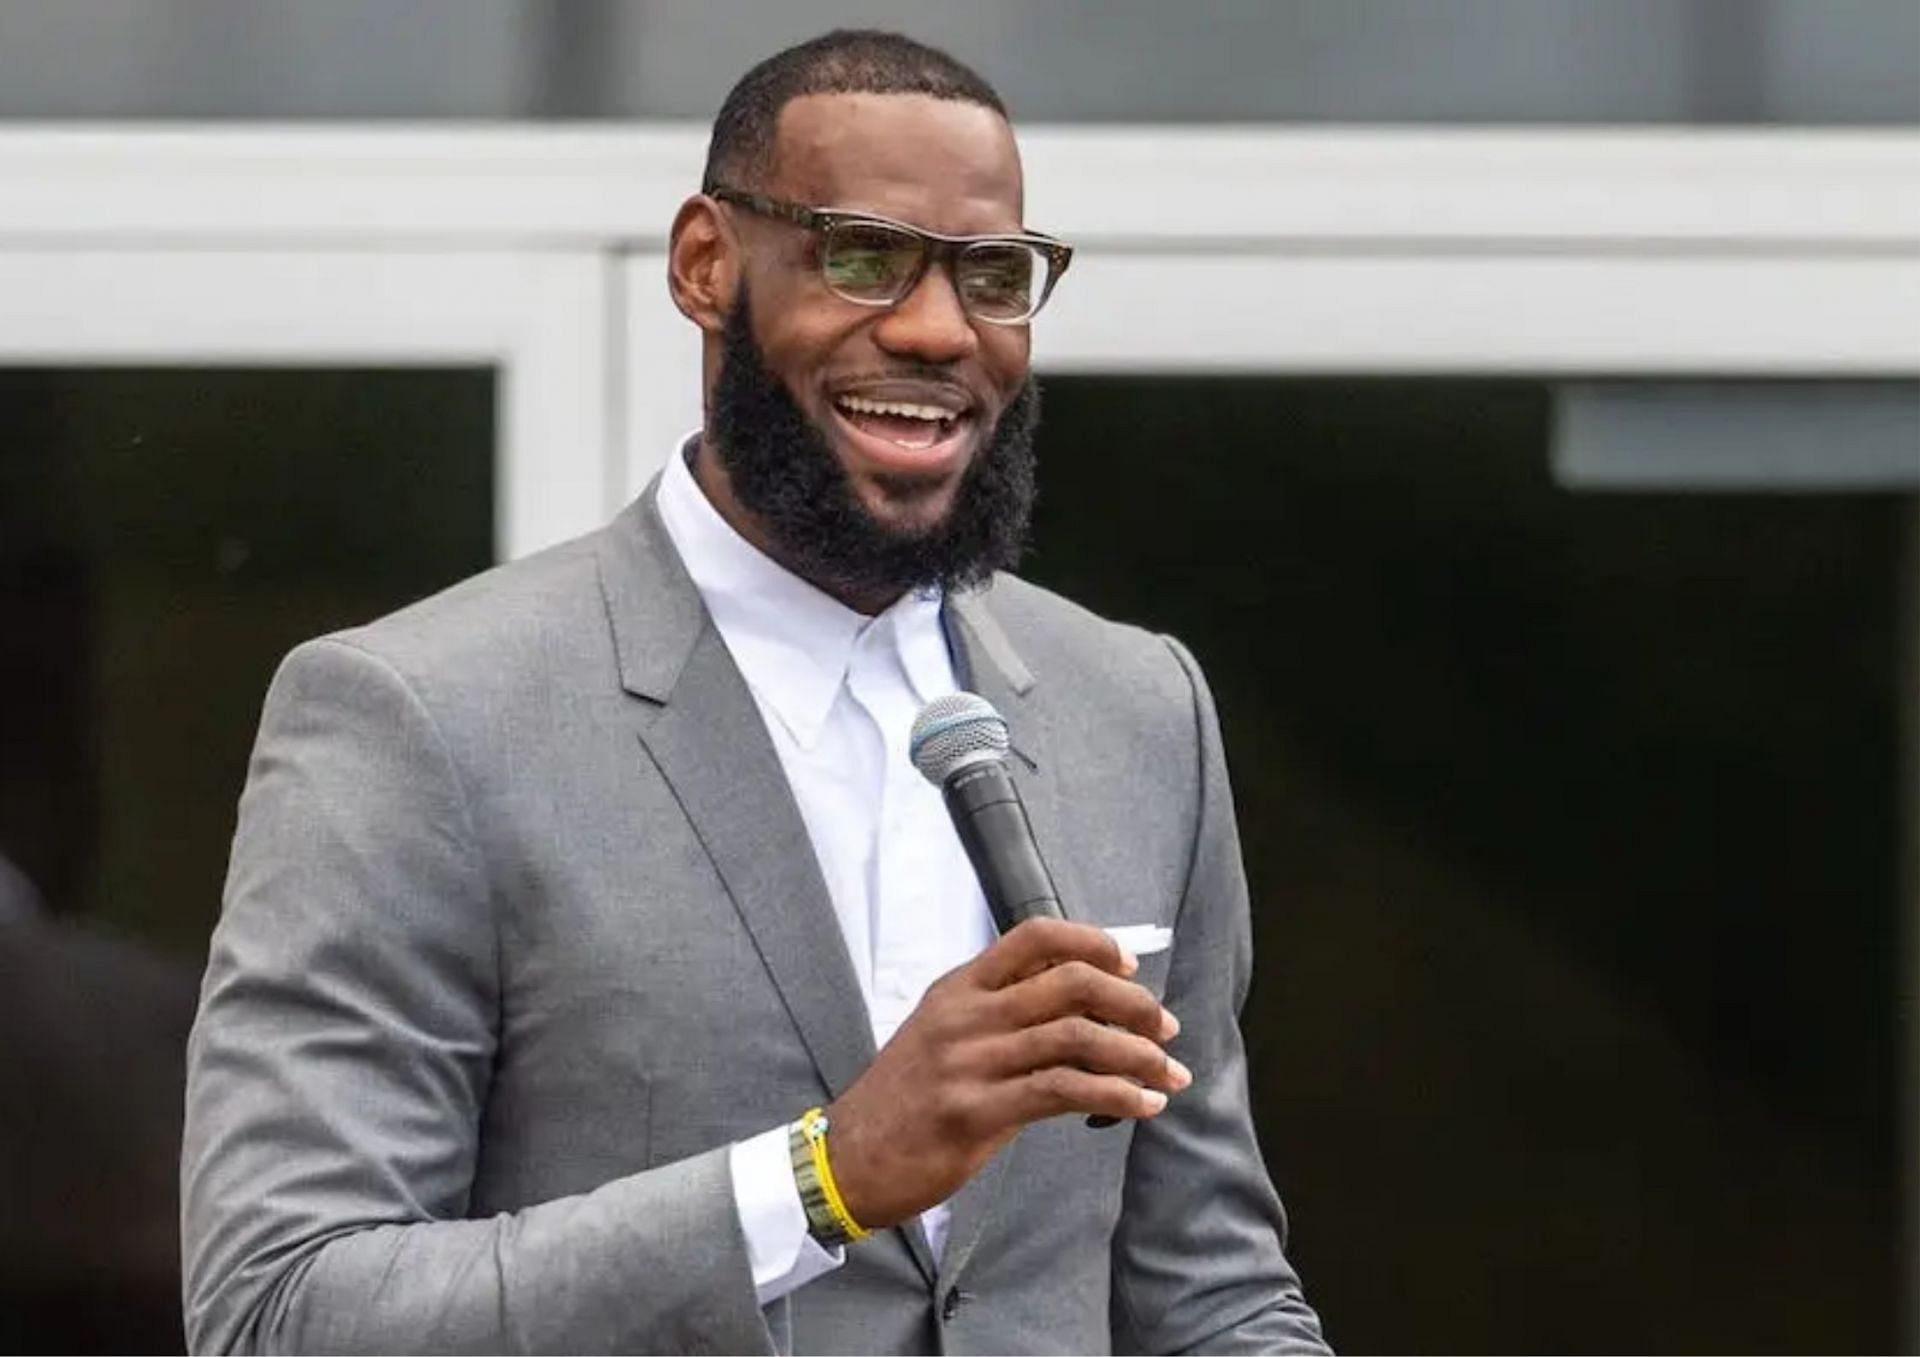 LeBron James, via his foundation, will open a 50-unit building with modern amenities at an affordable price in Akron, Ohio.